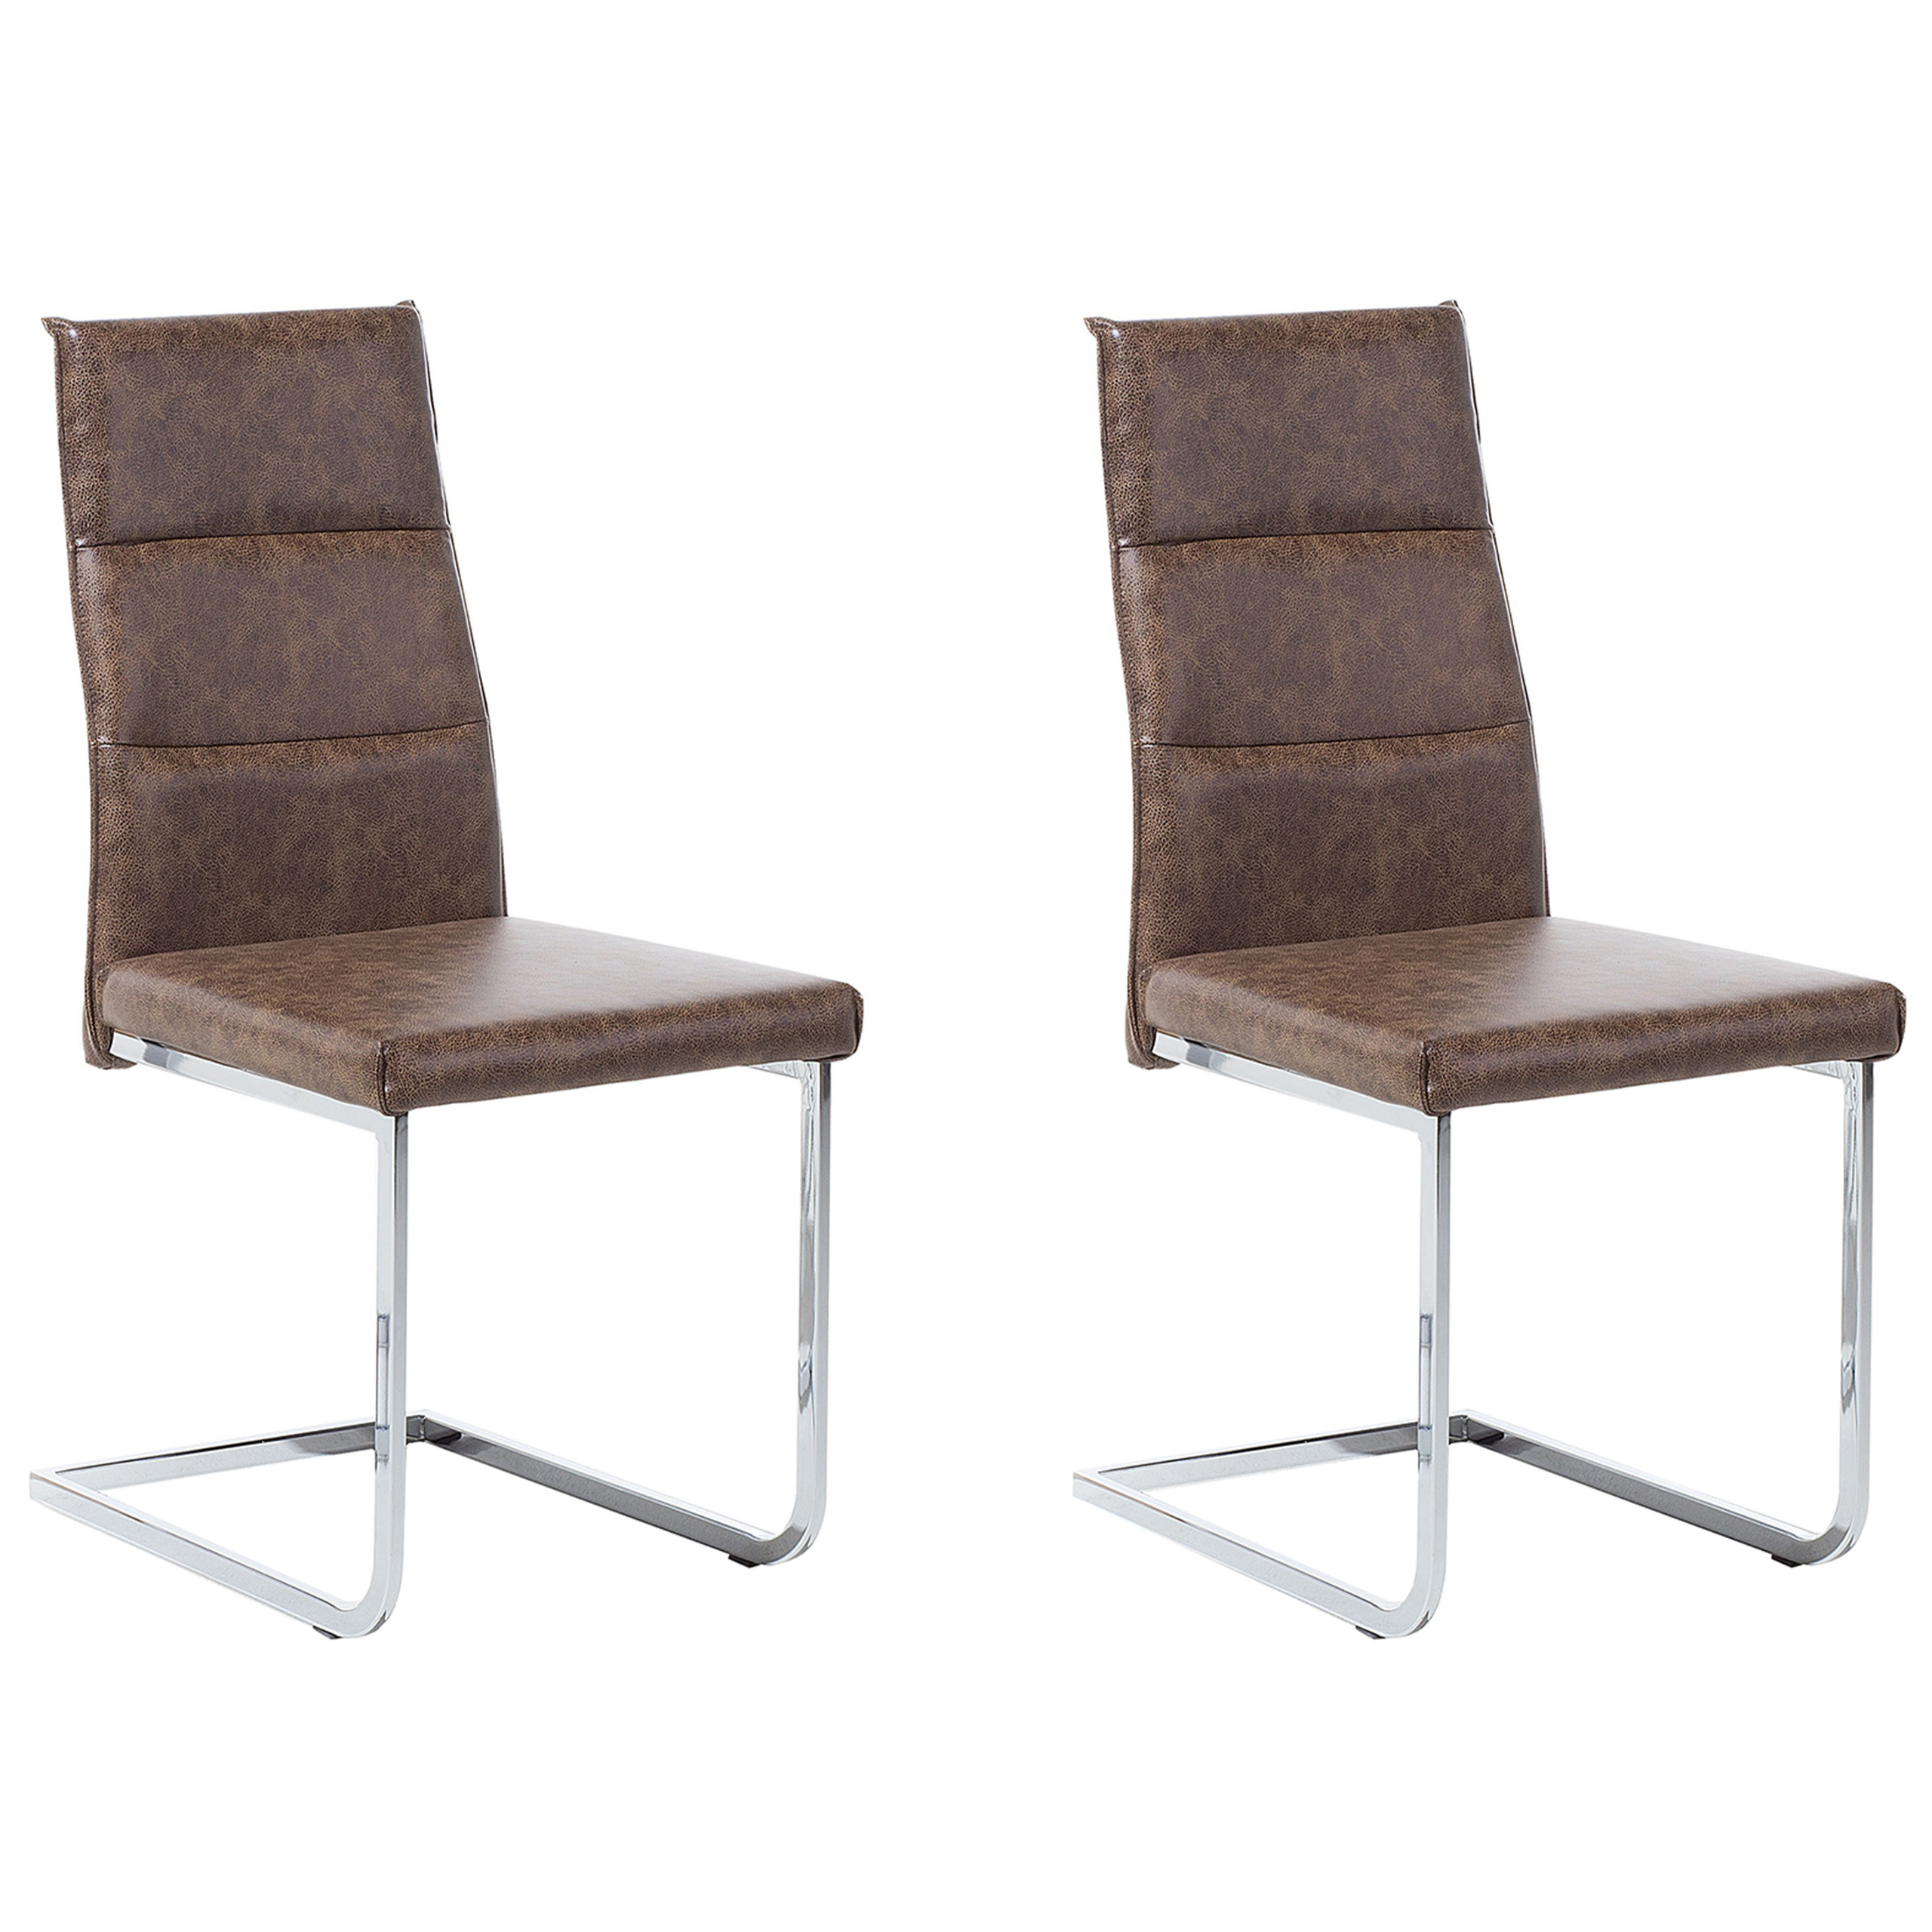 Beliani Set of 2 Dining Chairs Brown Faux Leather Upholstered Cantilever Silver Legs Armless Vintage Design